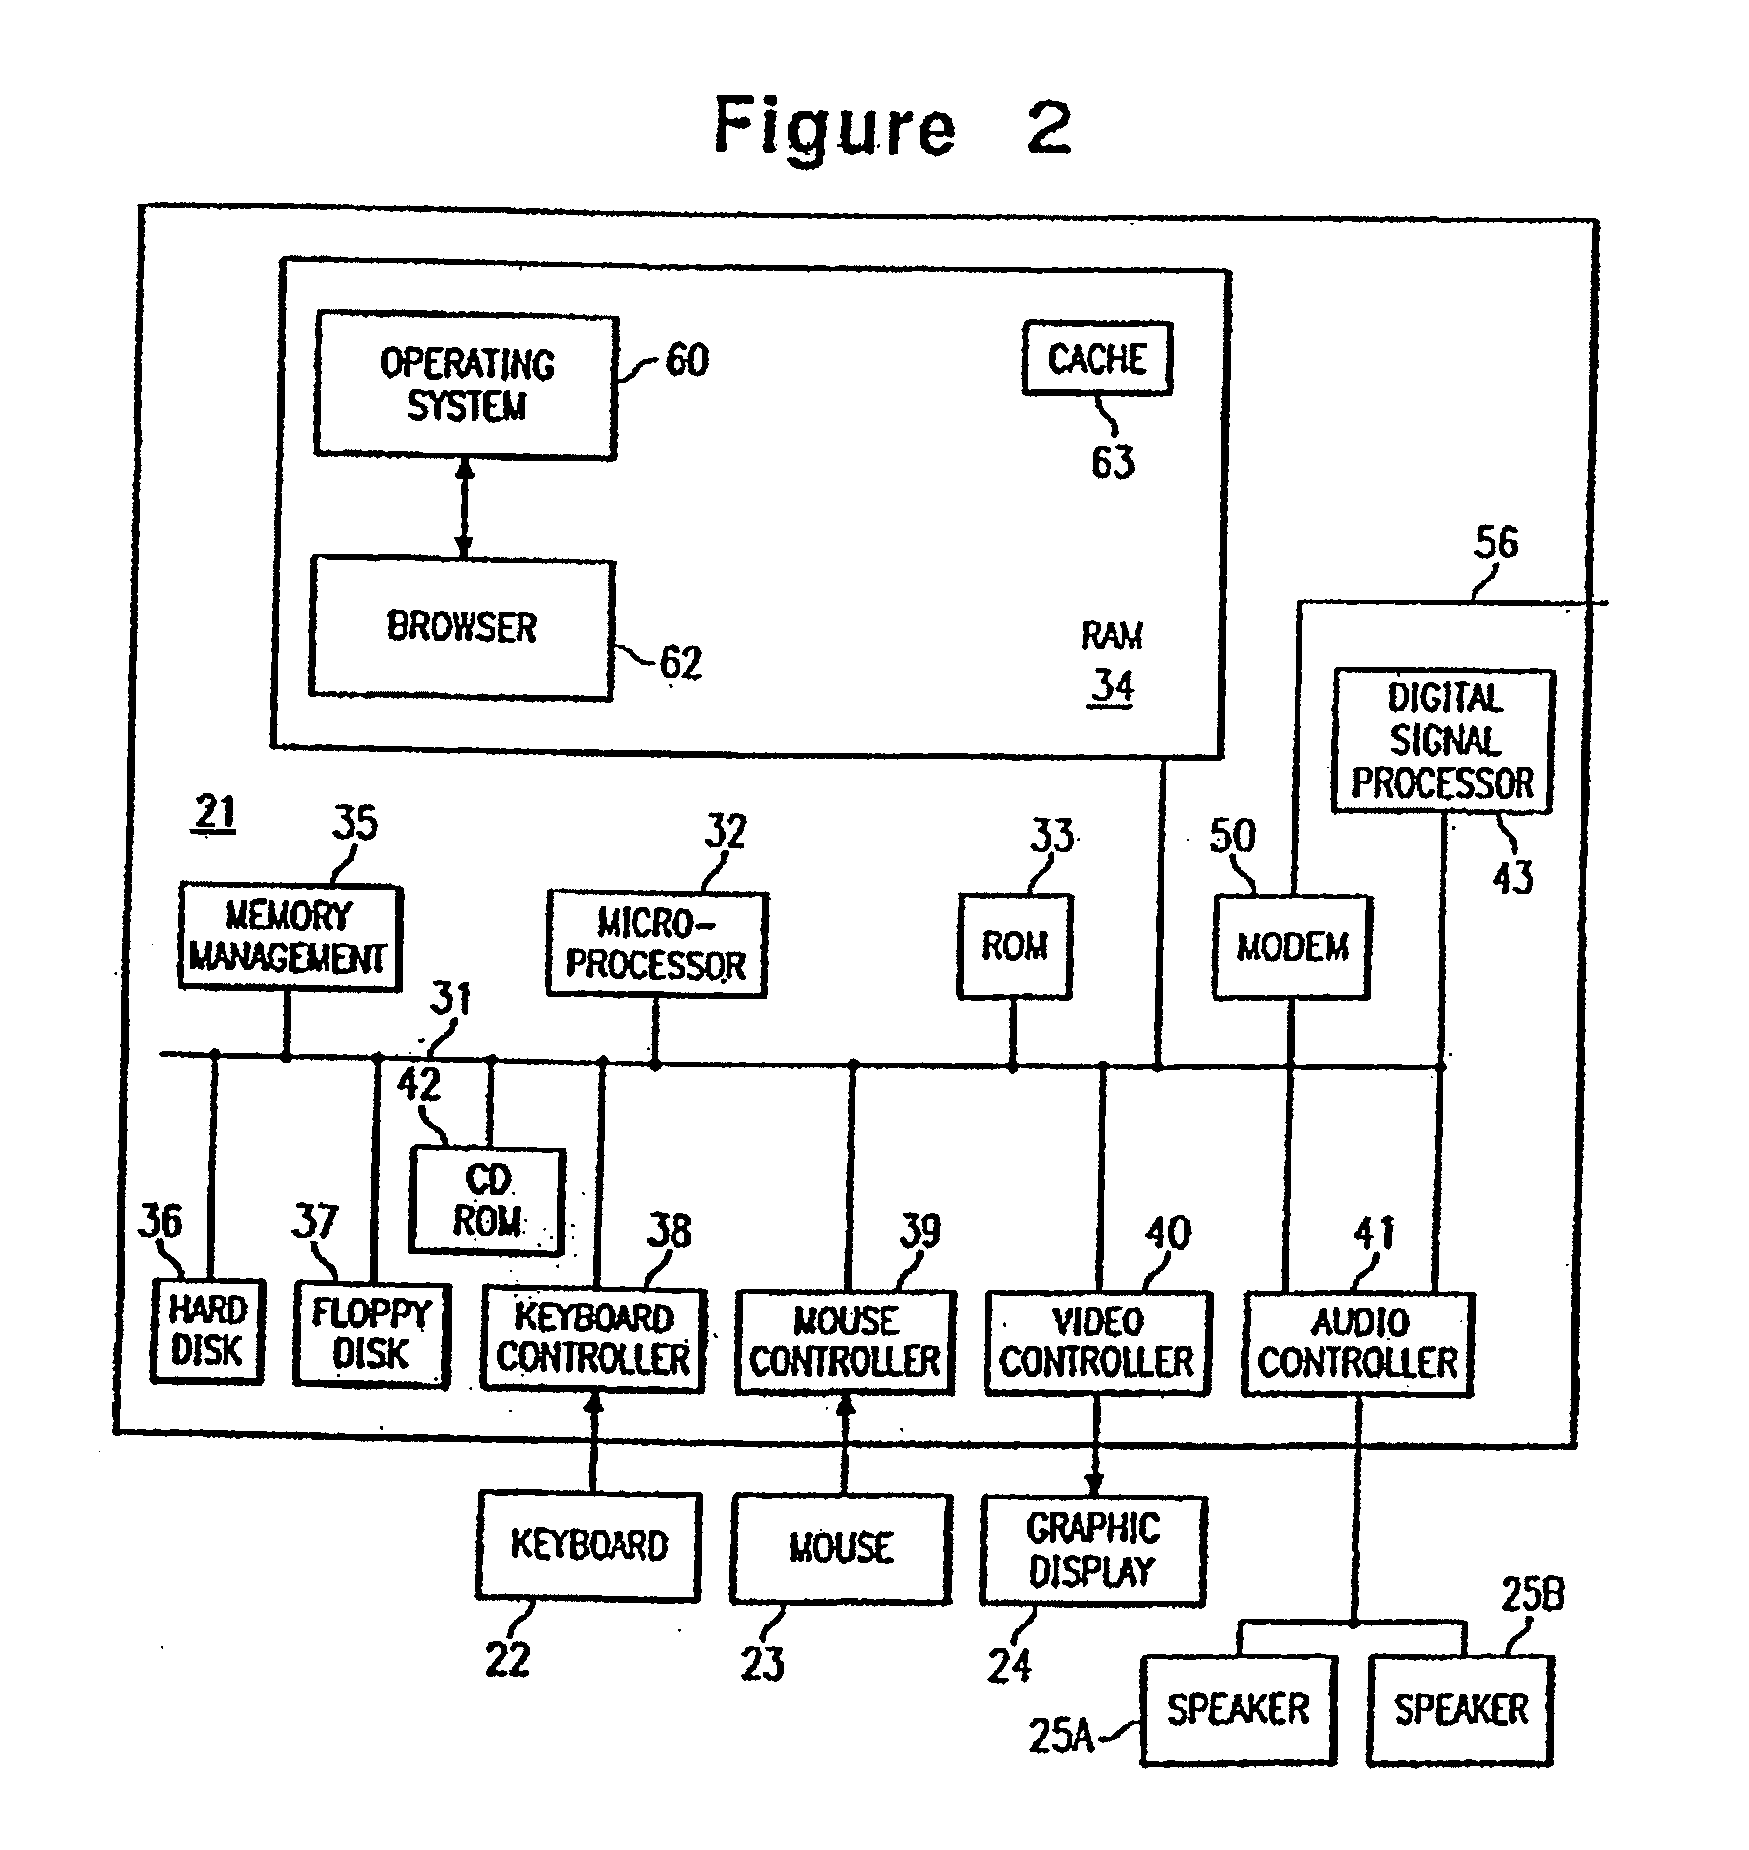 Method and apparatus for tracking client interaction with a network resource